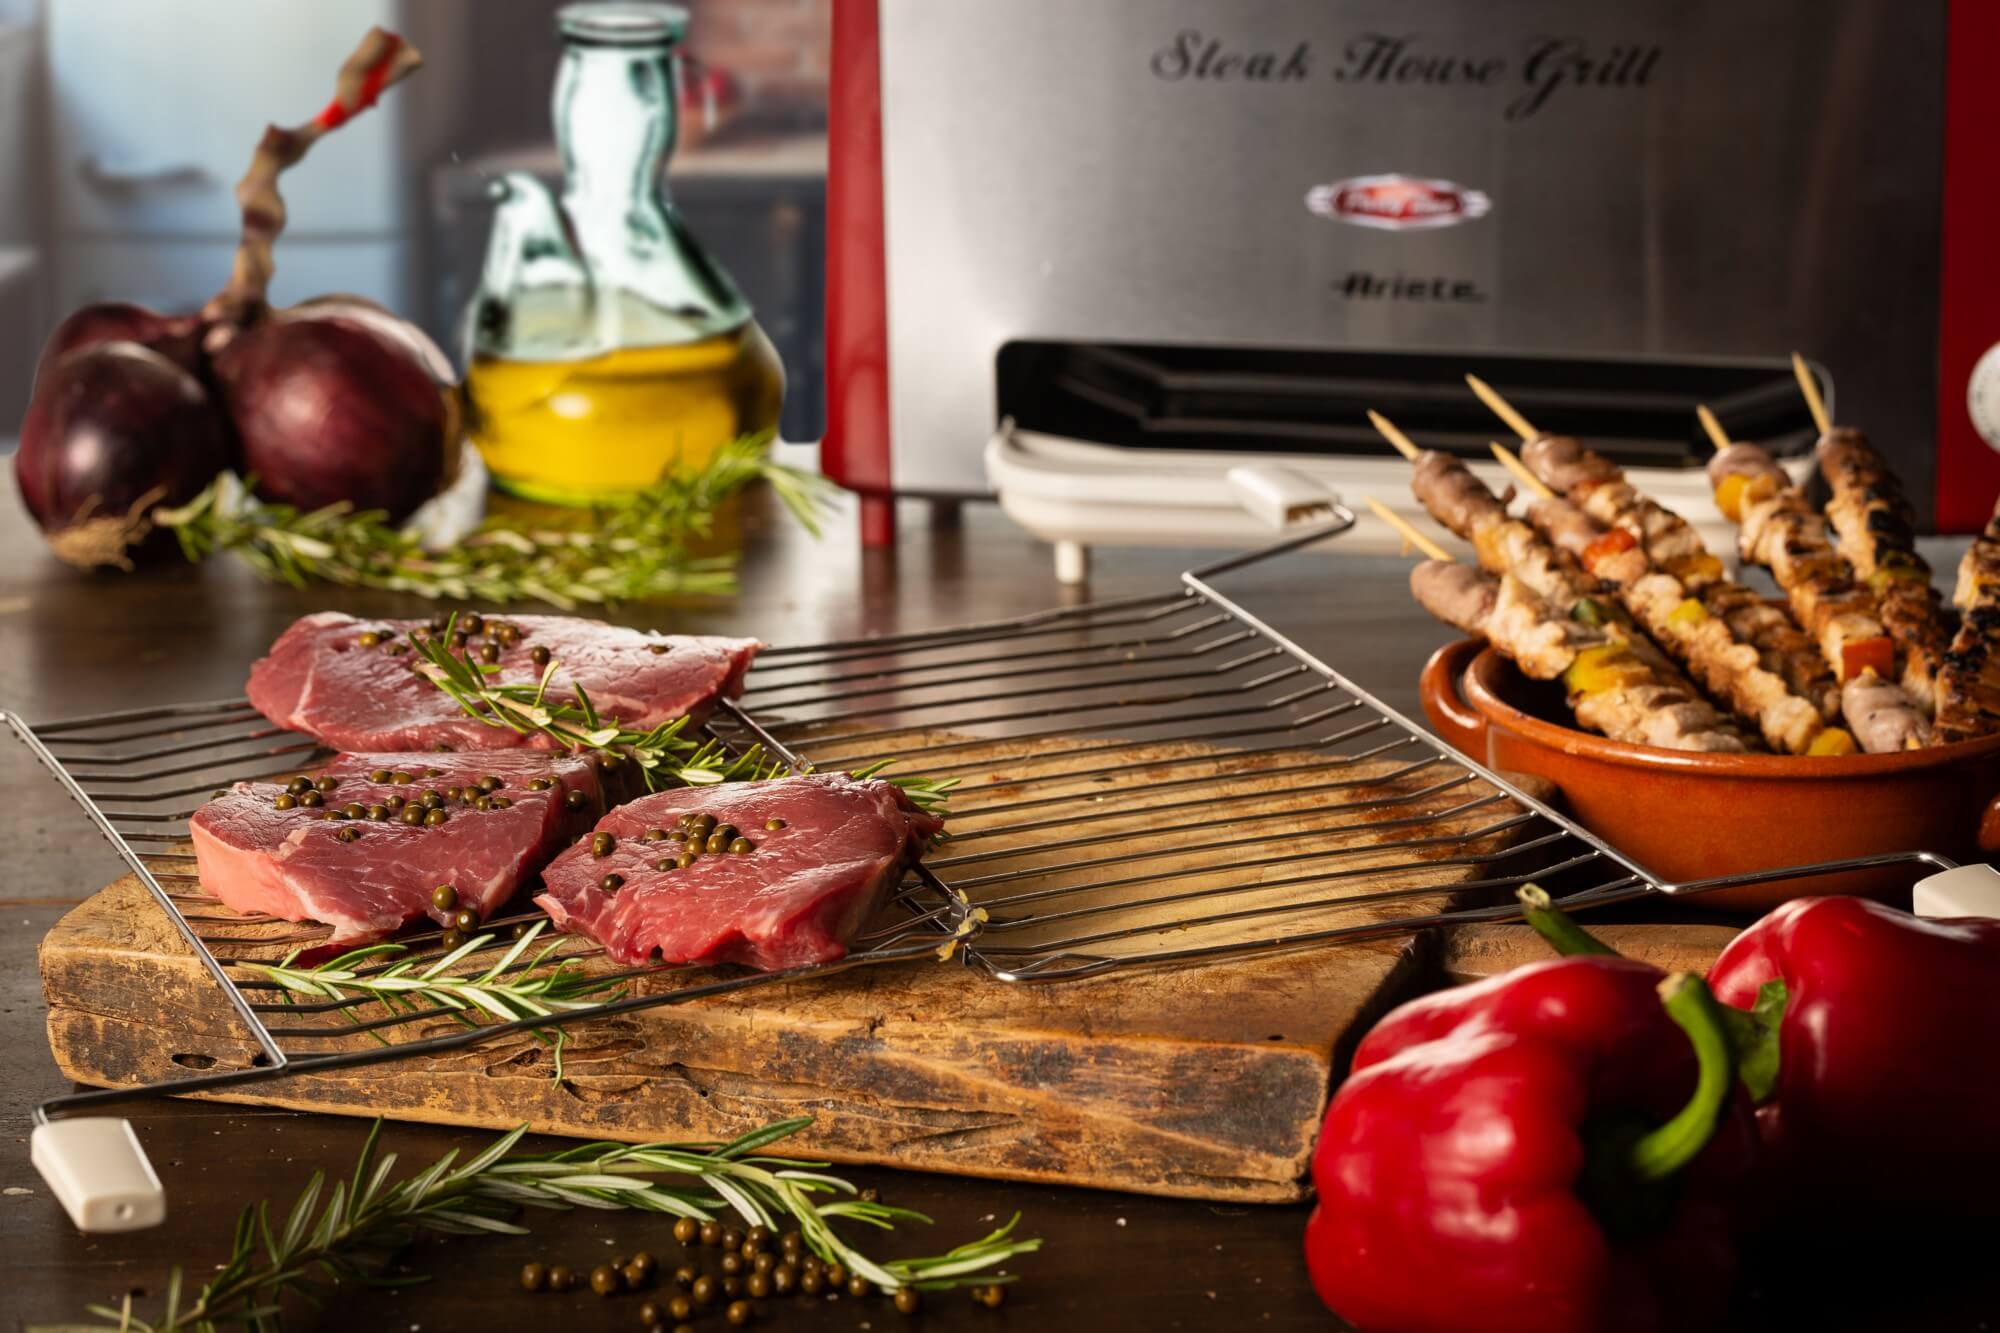 Vertical grill for meat, steaks, fish, vegetables | Ariete